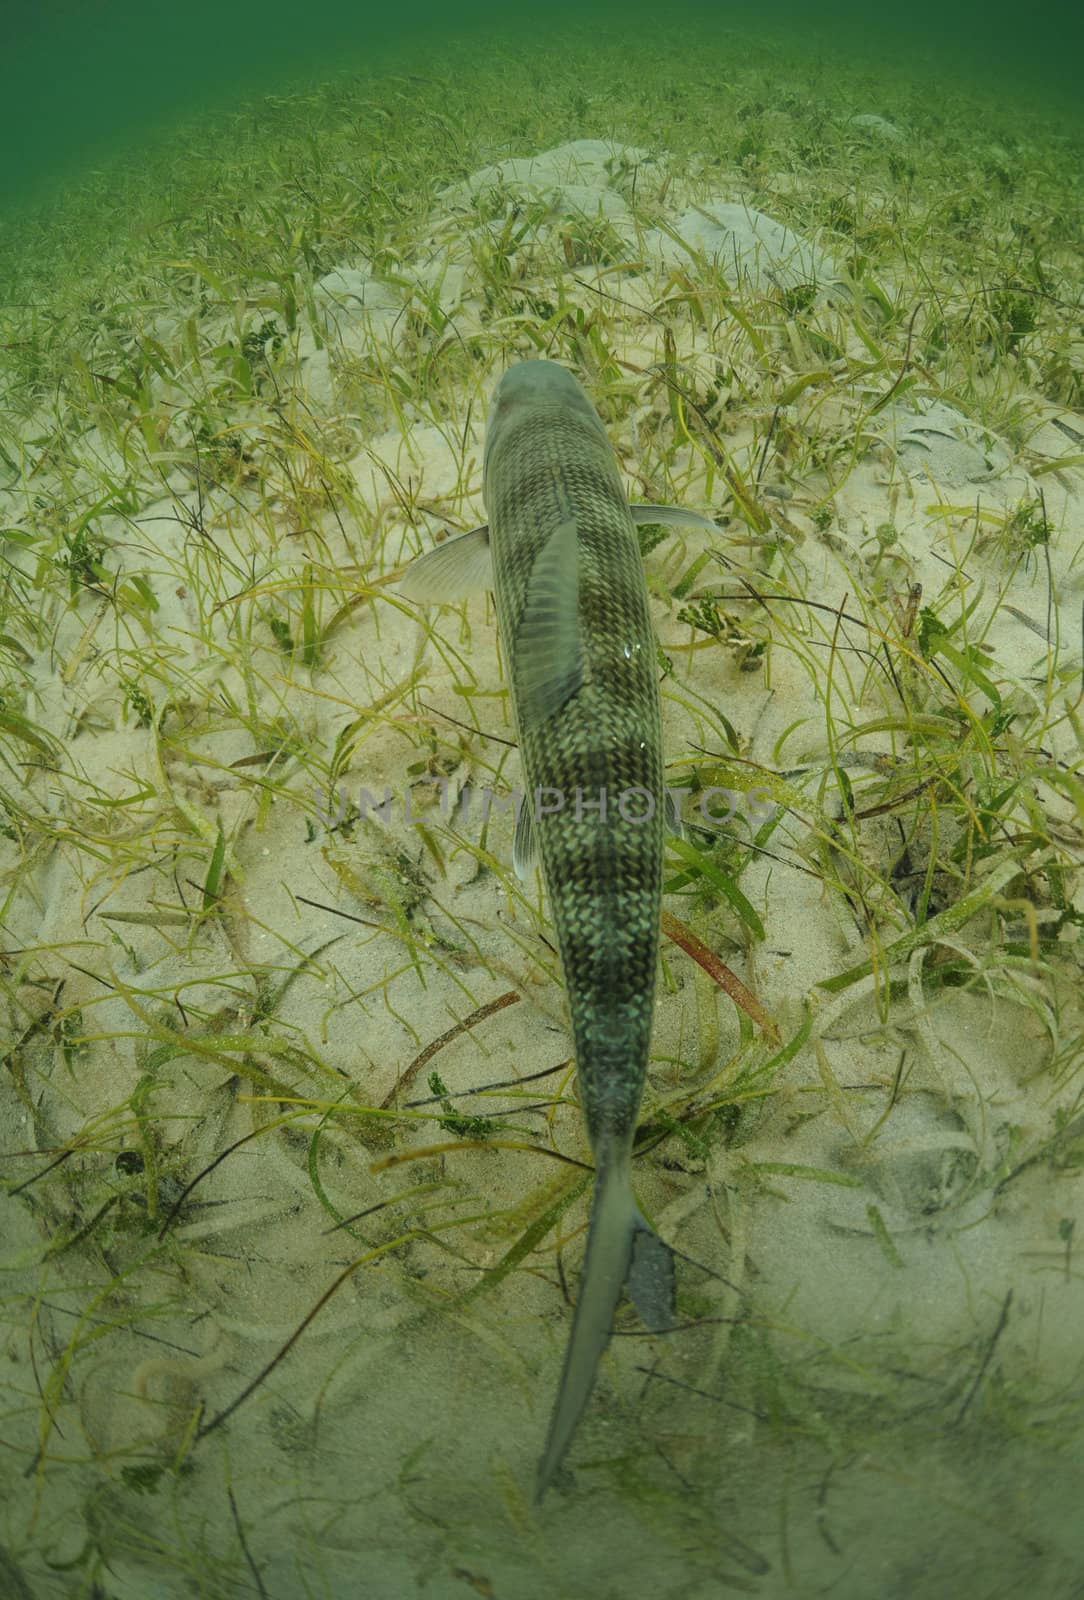 bonefish is swimming in the grass flats ocean  by ftlaudgirl